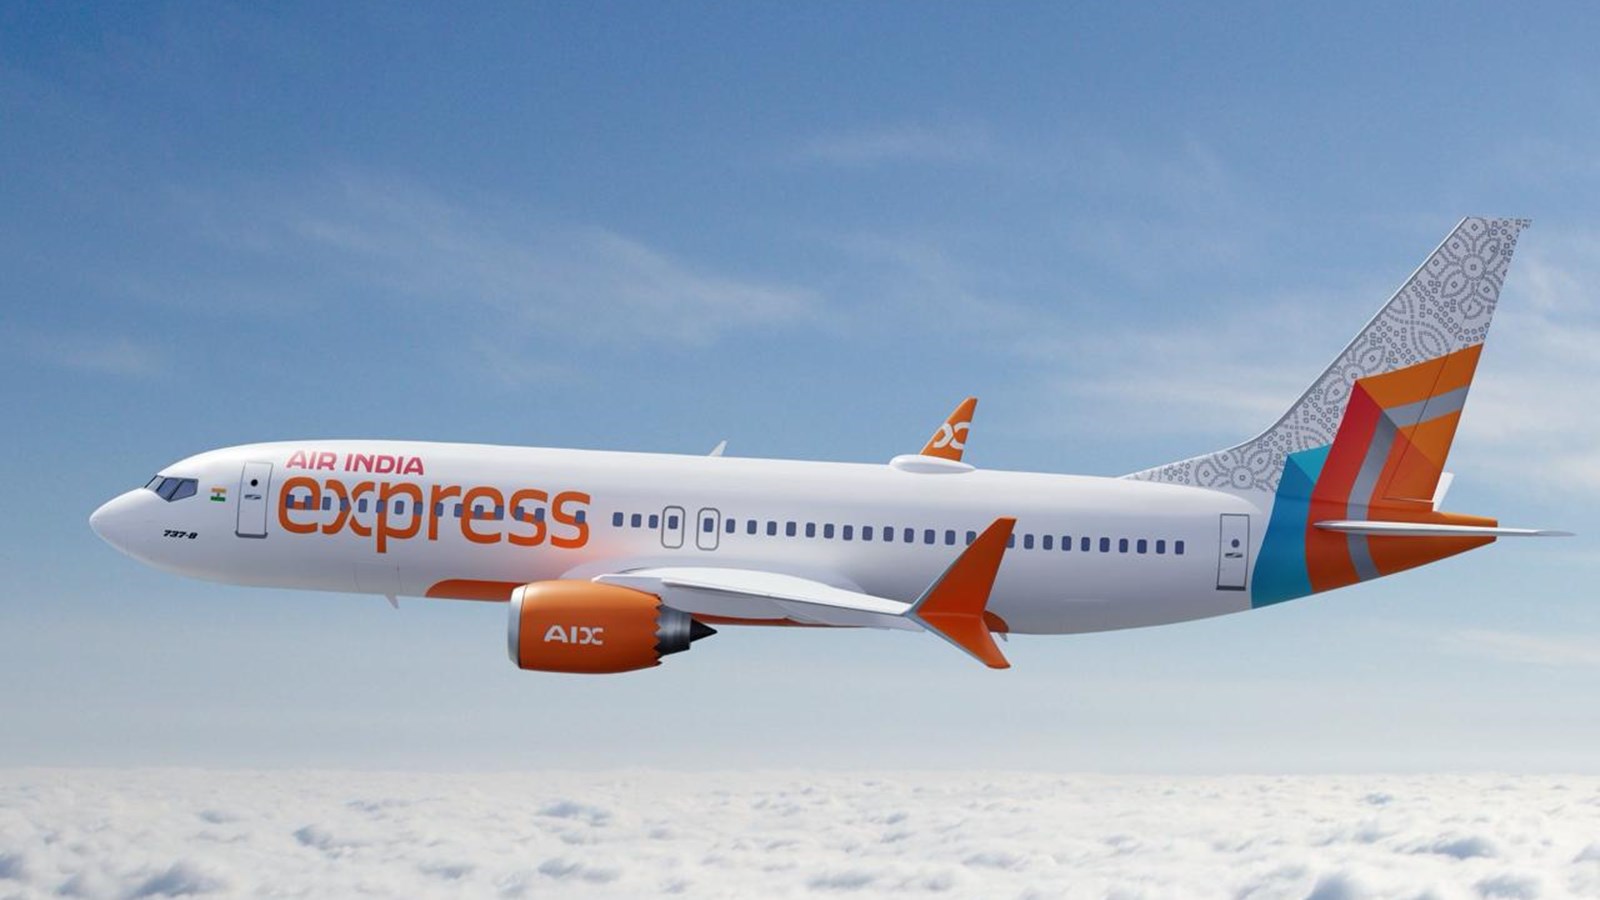 android, in line with global lcc practice, air india express launches cabin bag-only fares